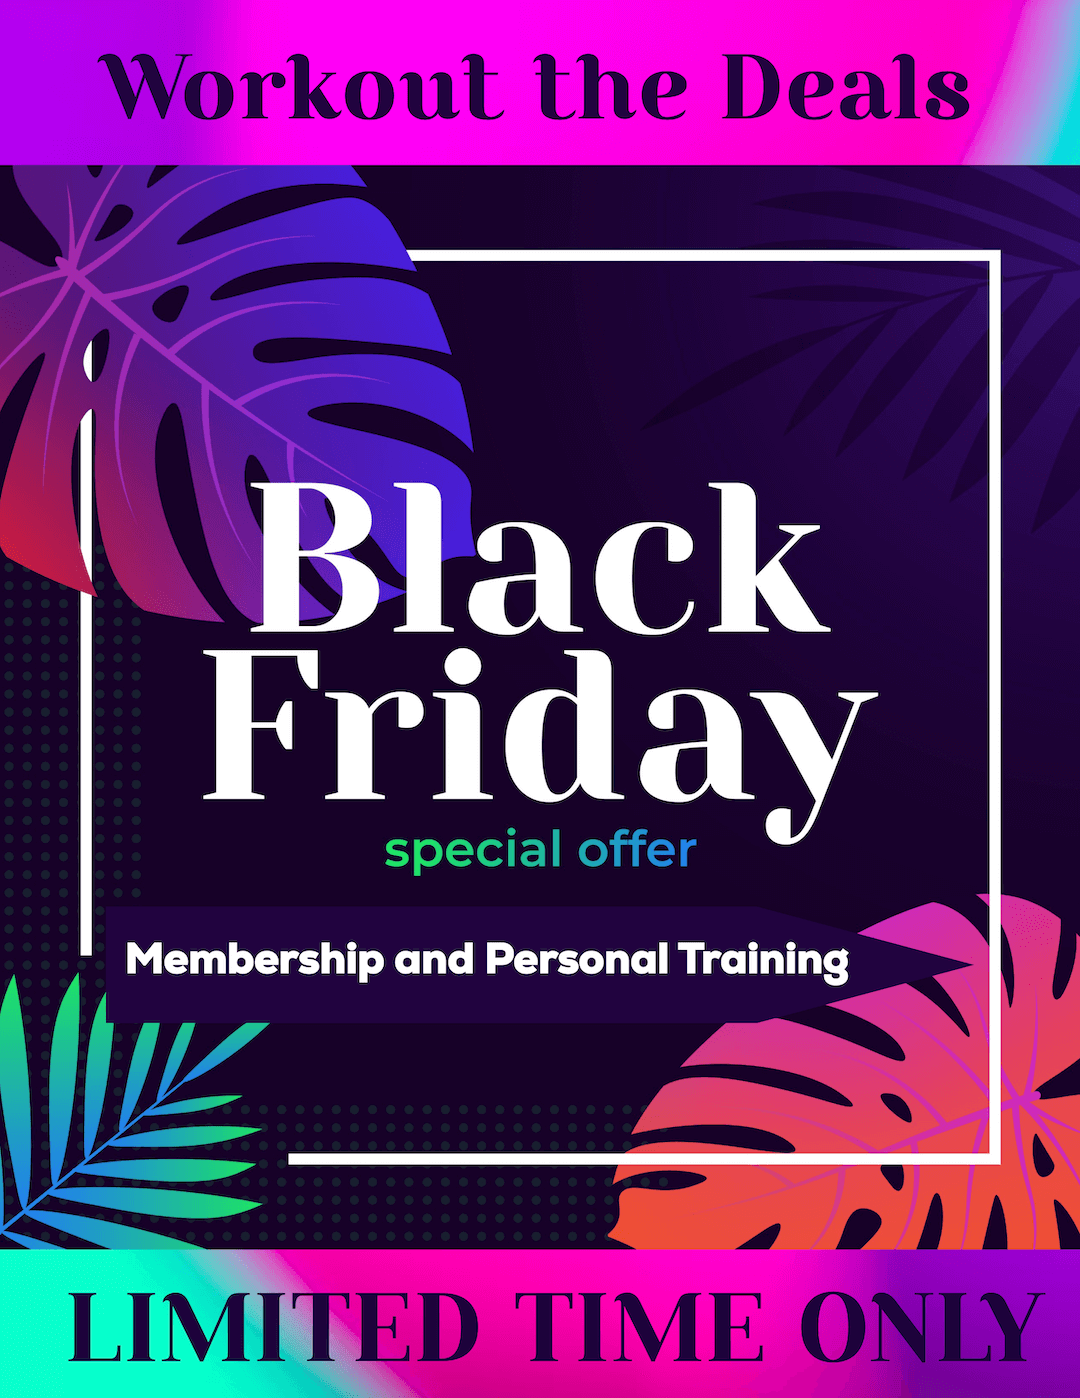 Workout the Deals - Black Friday Special Offer: Membership & Personal Training - Limited Time Only